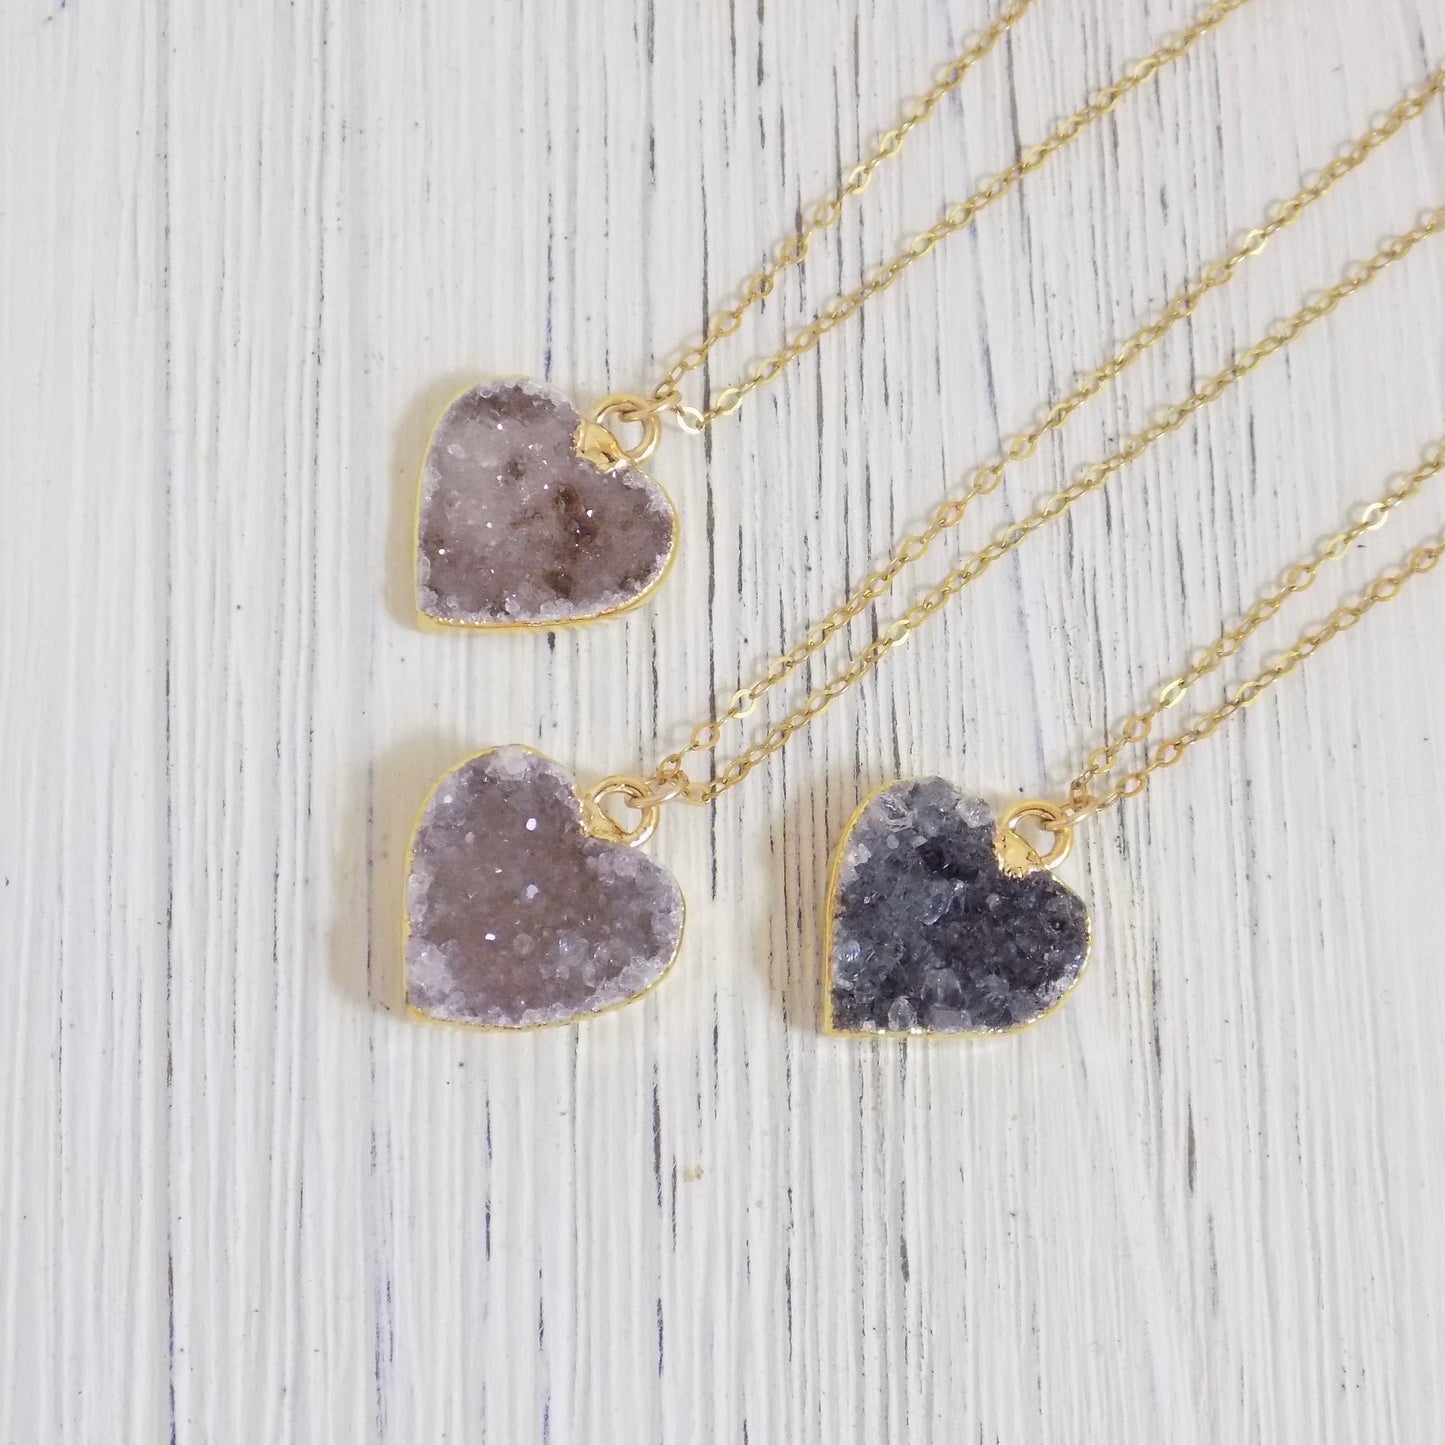 Druzy Necklace Heart, Personalized Necklace, Custom Necklace, Gemstone Necklace, Minimalist Necklace, Crystal Necklace Gift Women R9-112